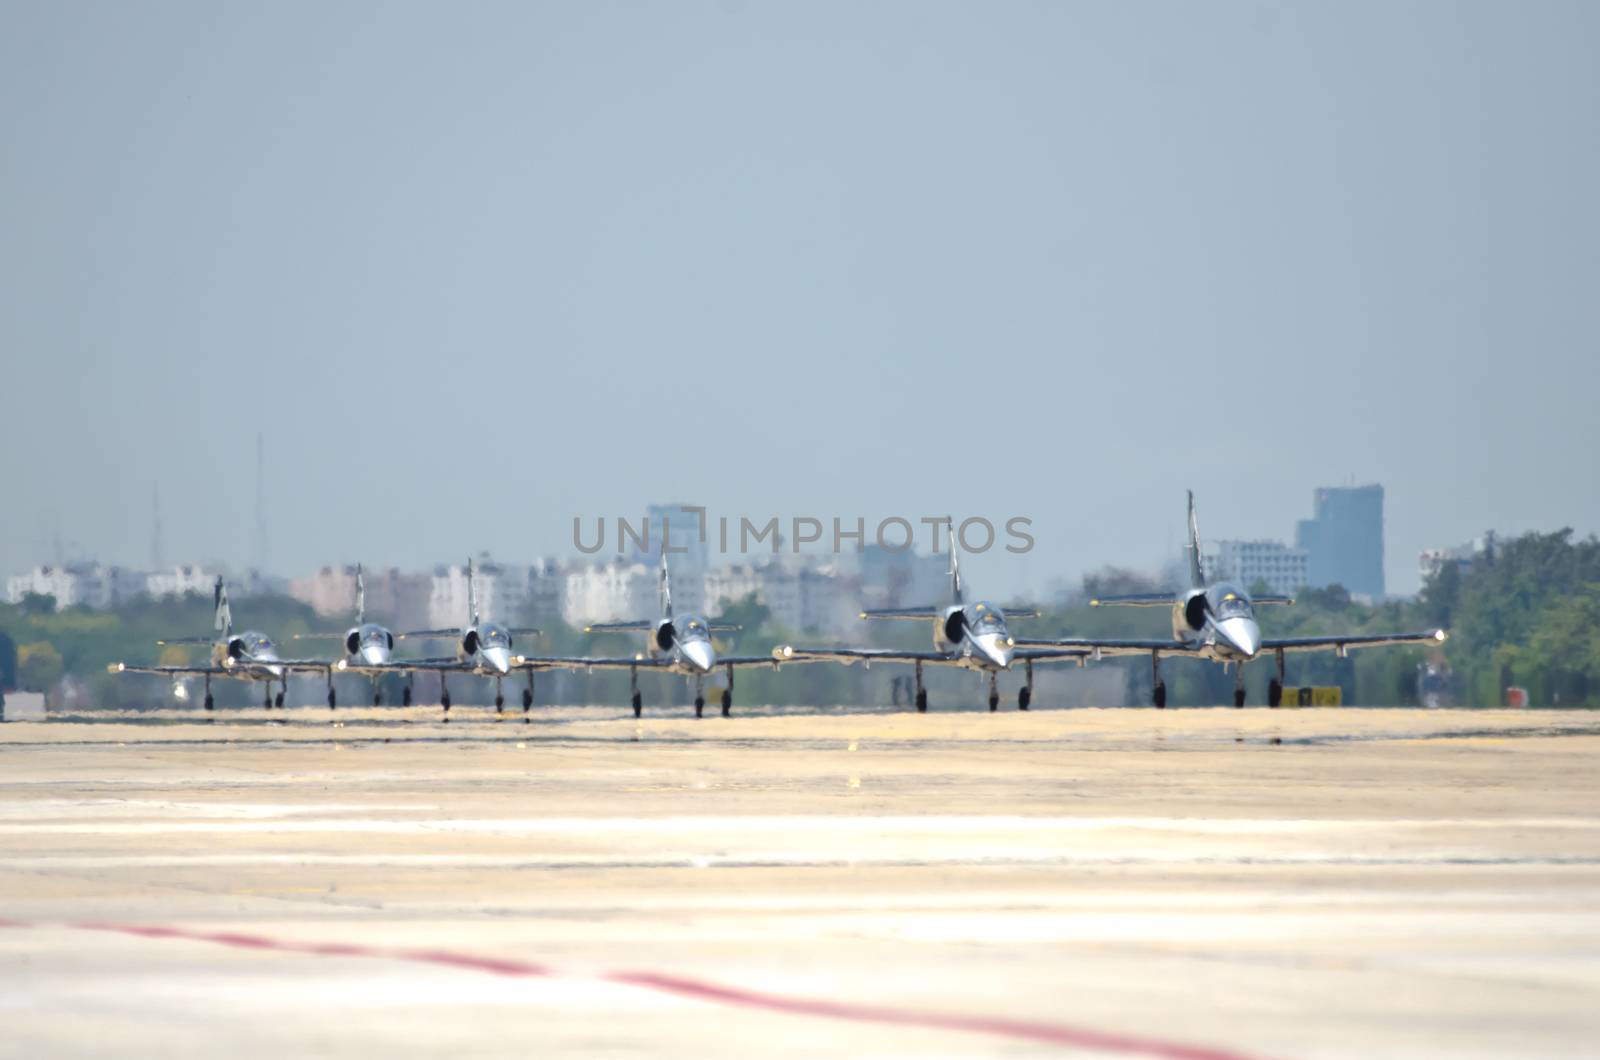 BANGKOK, THAILAND - MARCH 23: Airplanes L - 39UTI  Breitling Jet Team Under The Royal Sky in Don Muang Air Force in Bangkok, Thailand on March 23, 2013